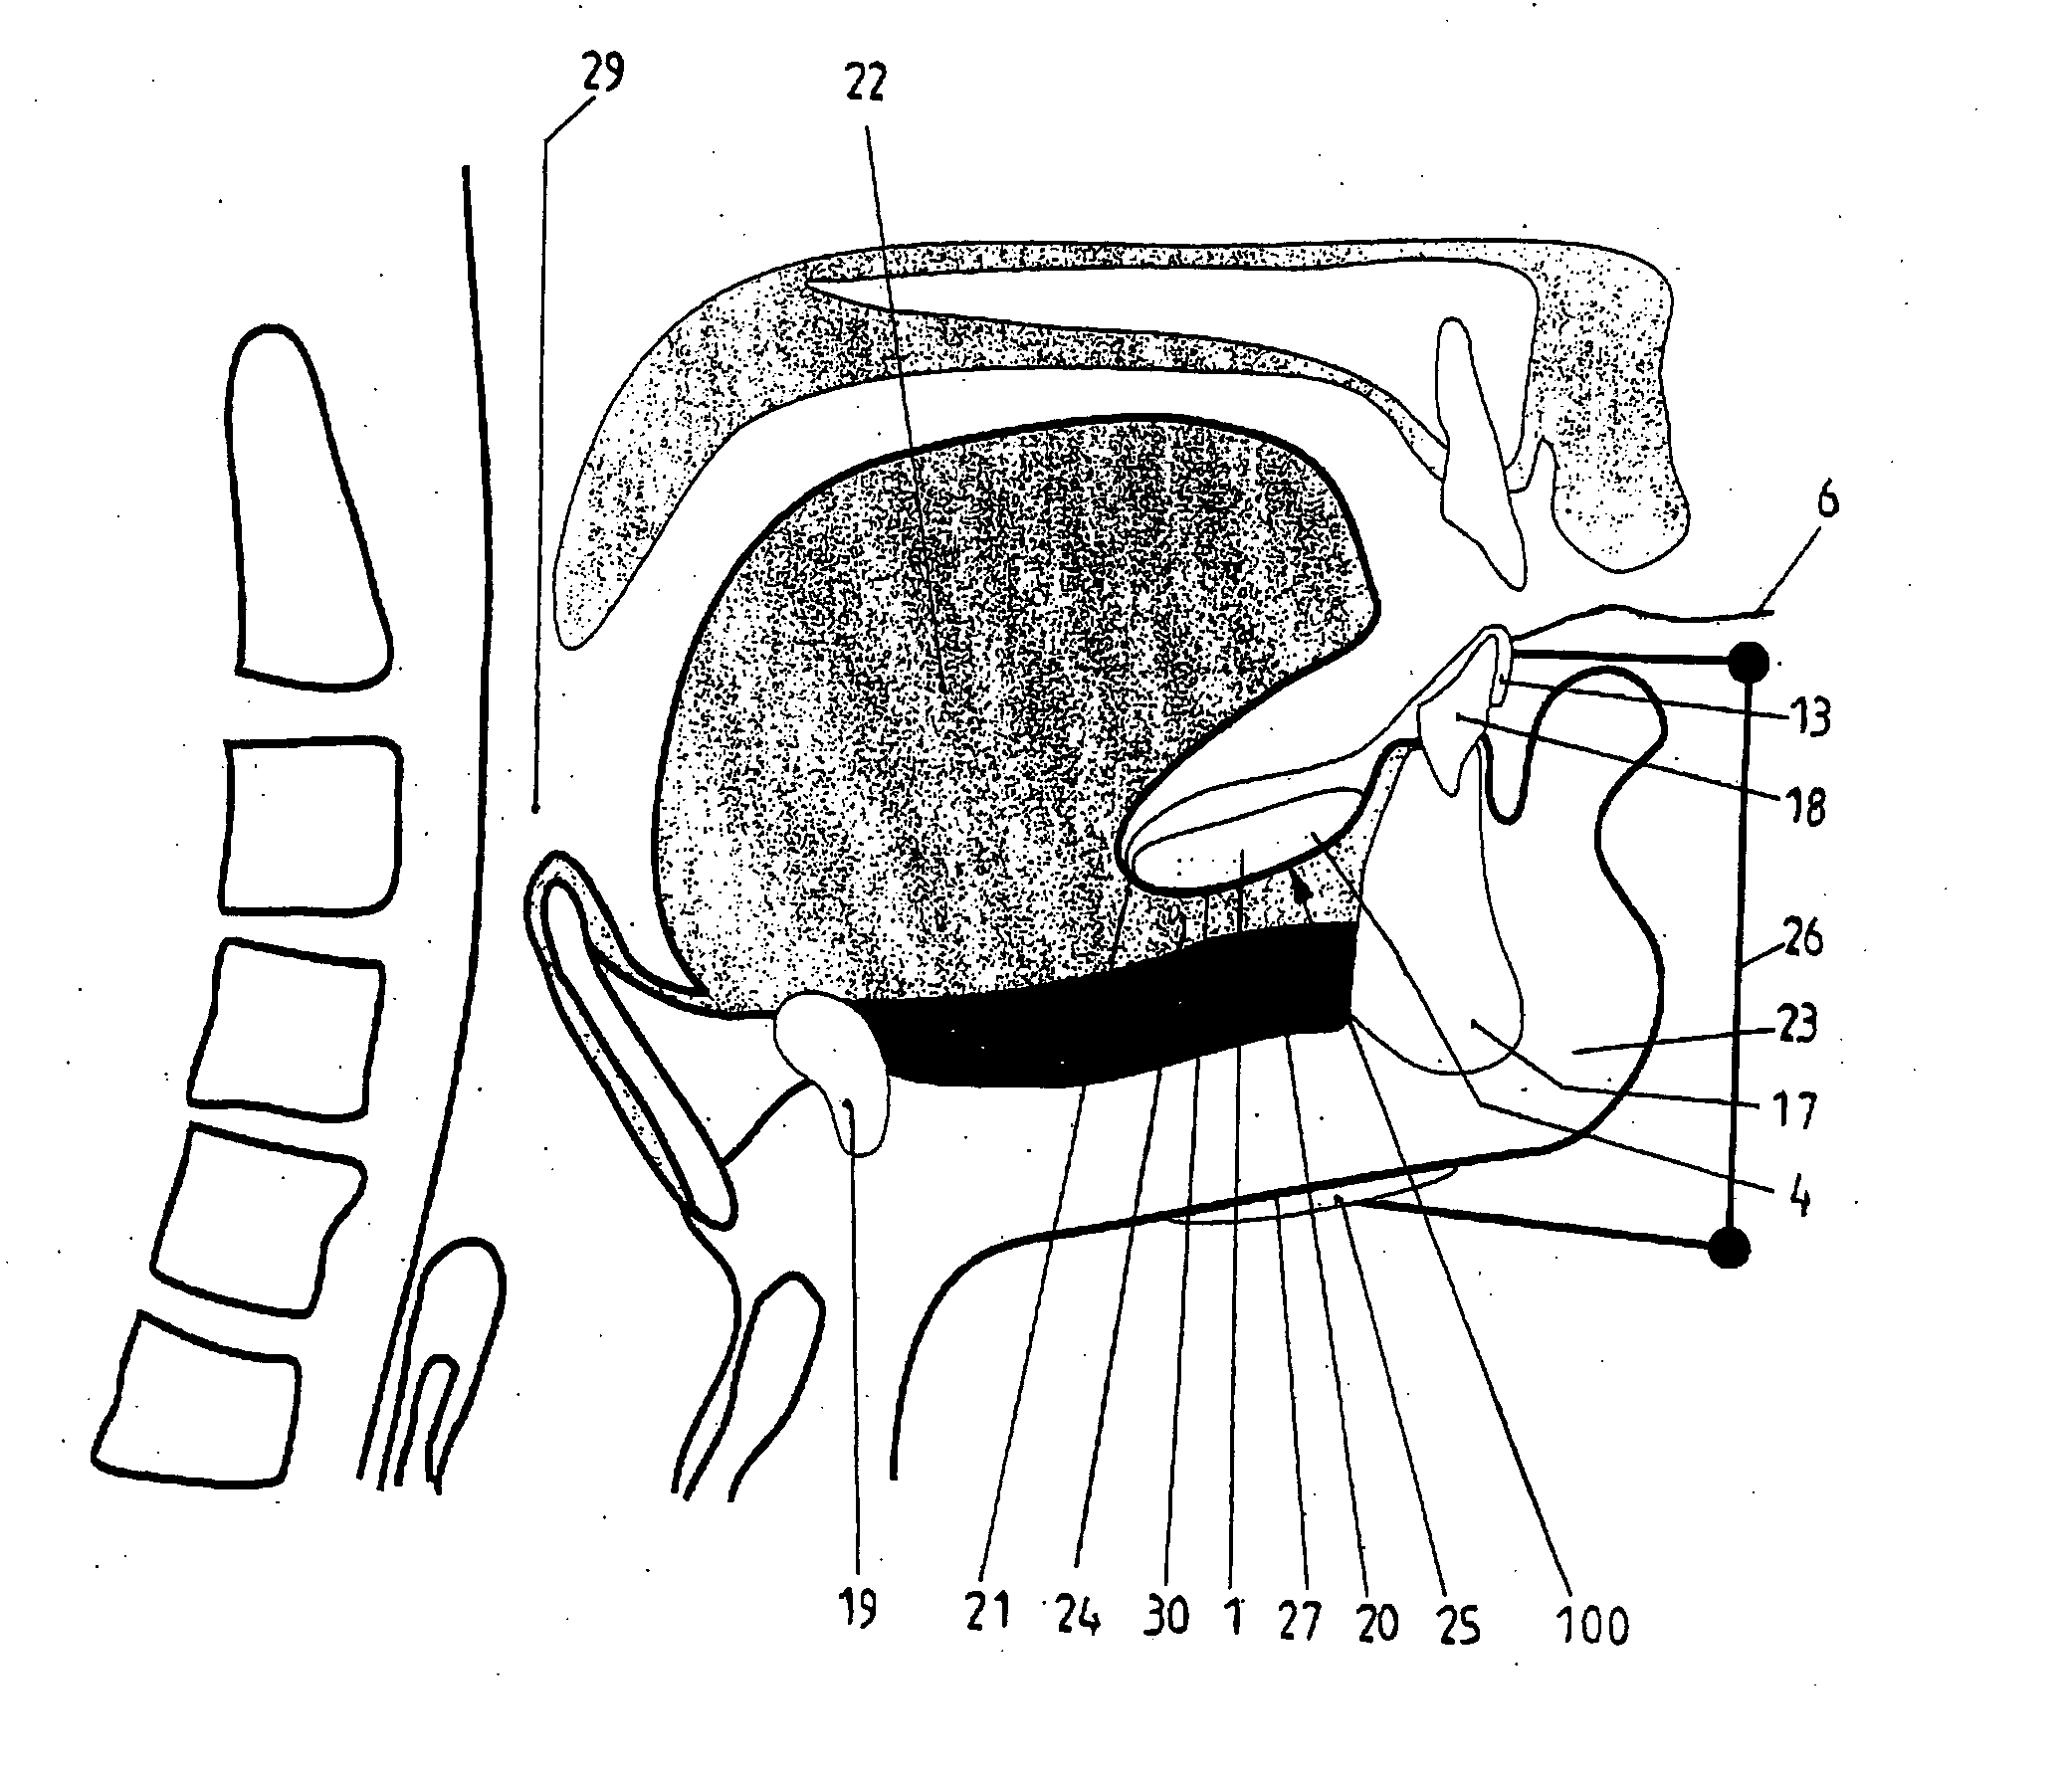 Apparatus for submental electrical stimulation of the supra hyoid muscles of the floor of mouth